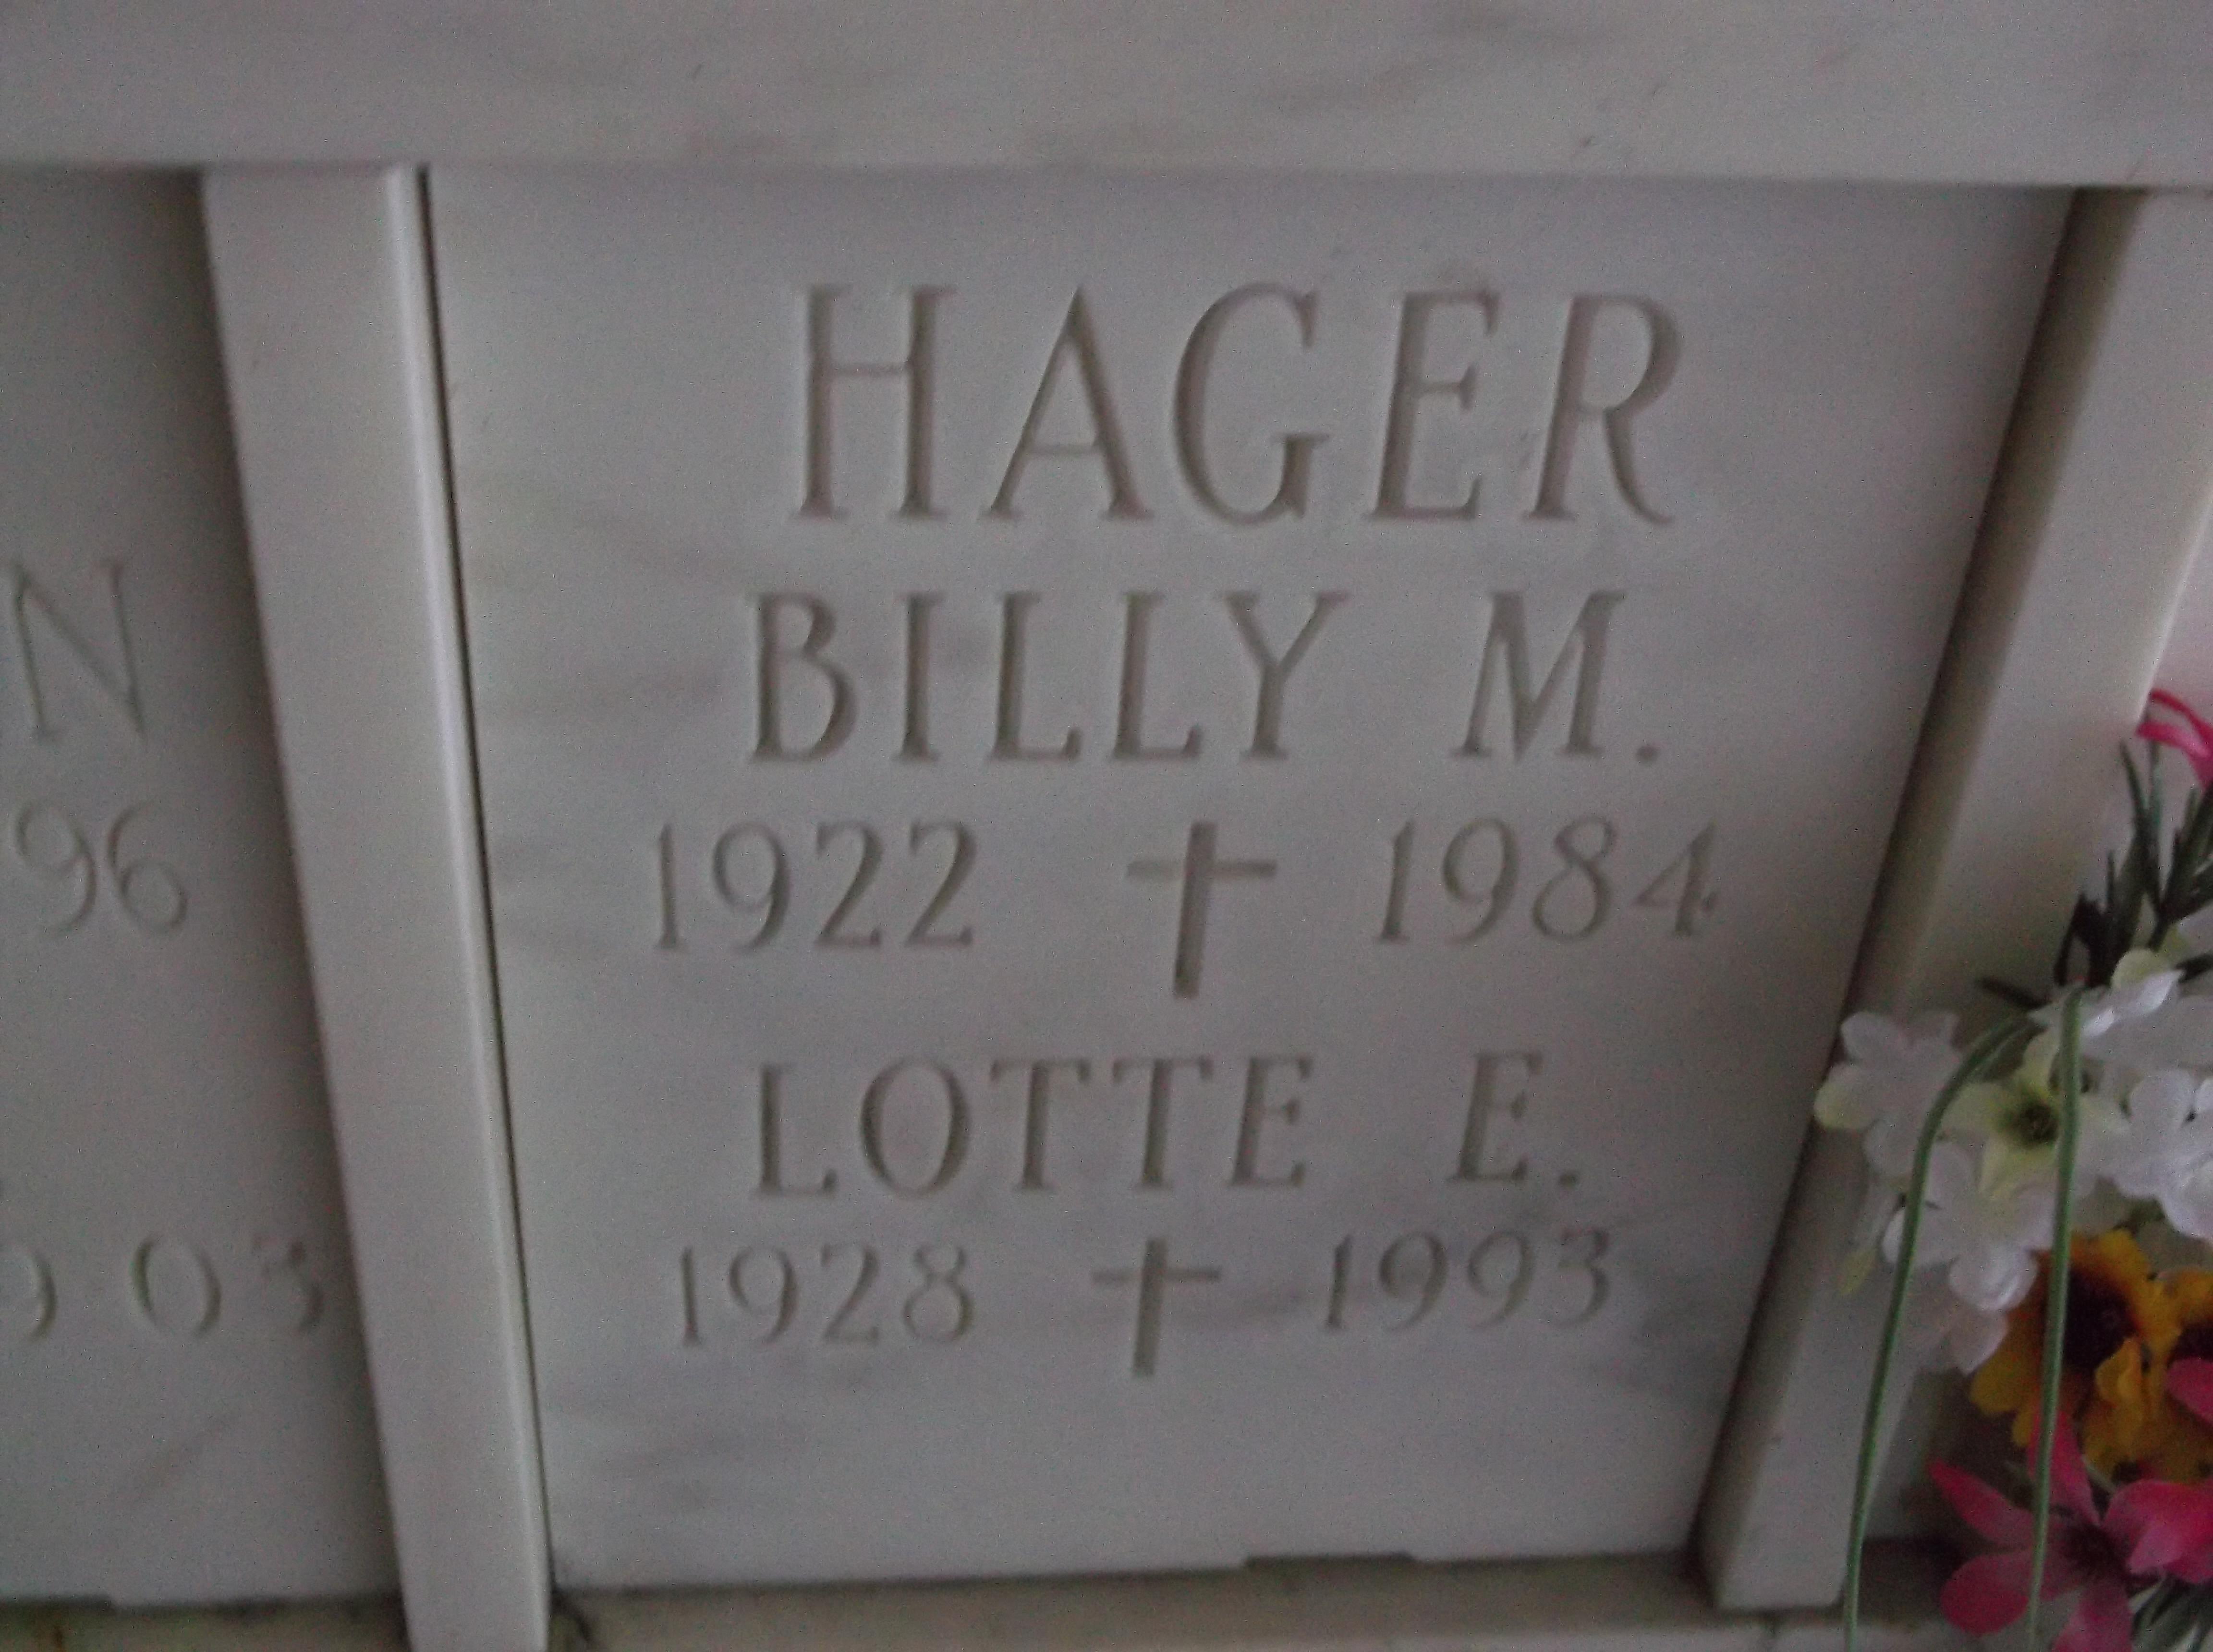 Billy M Hager